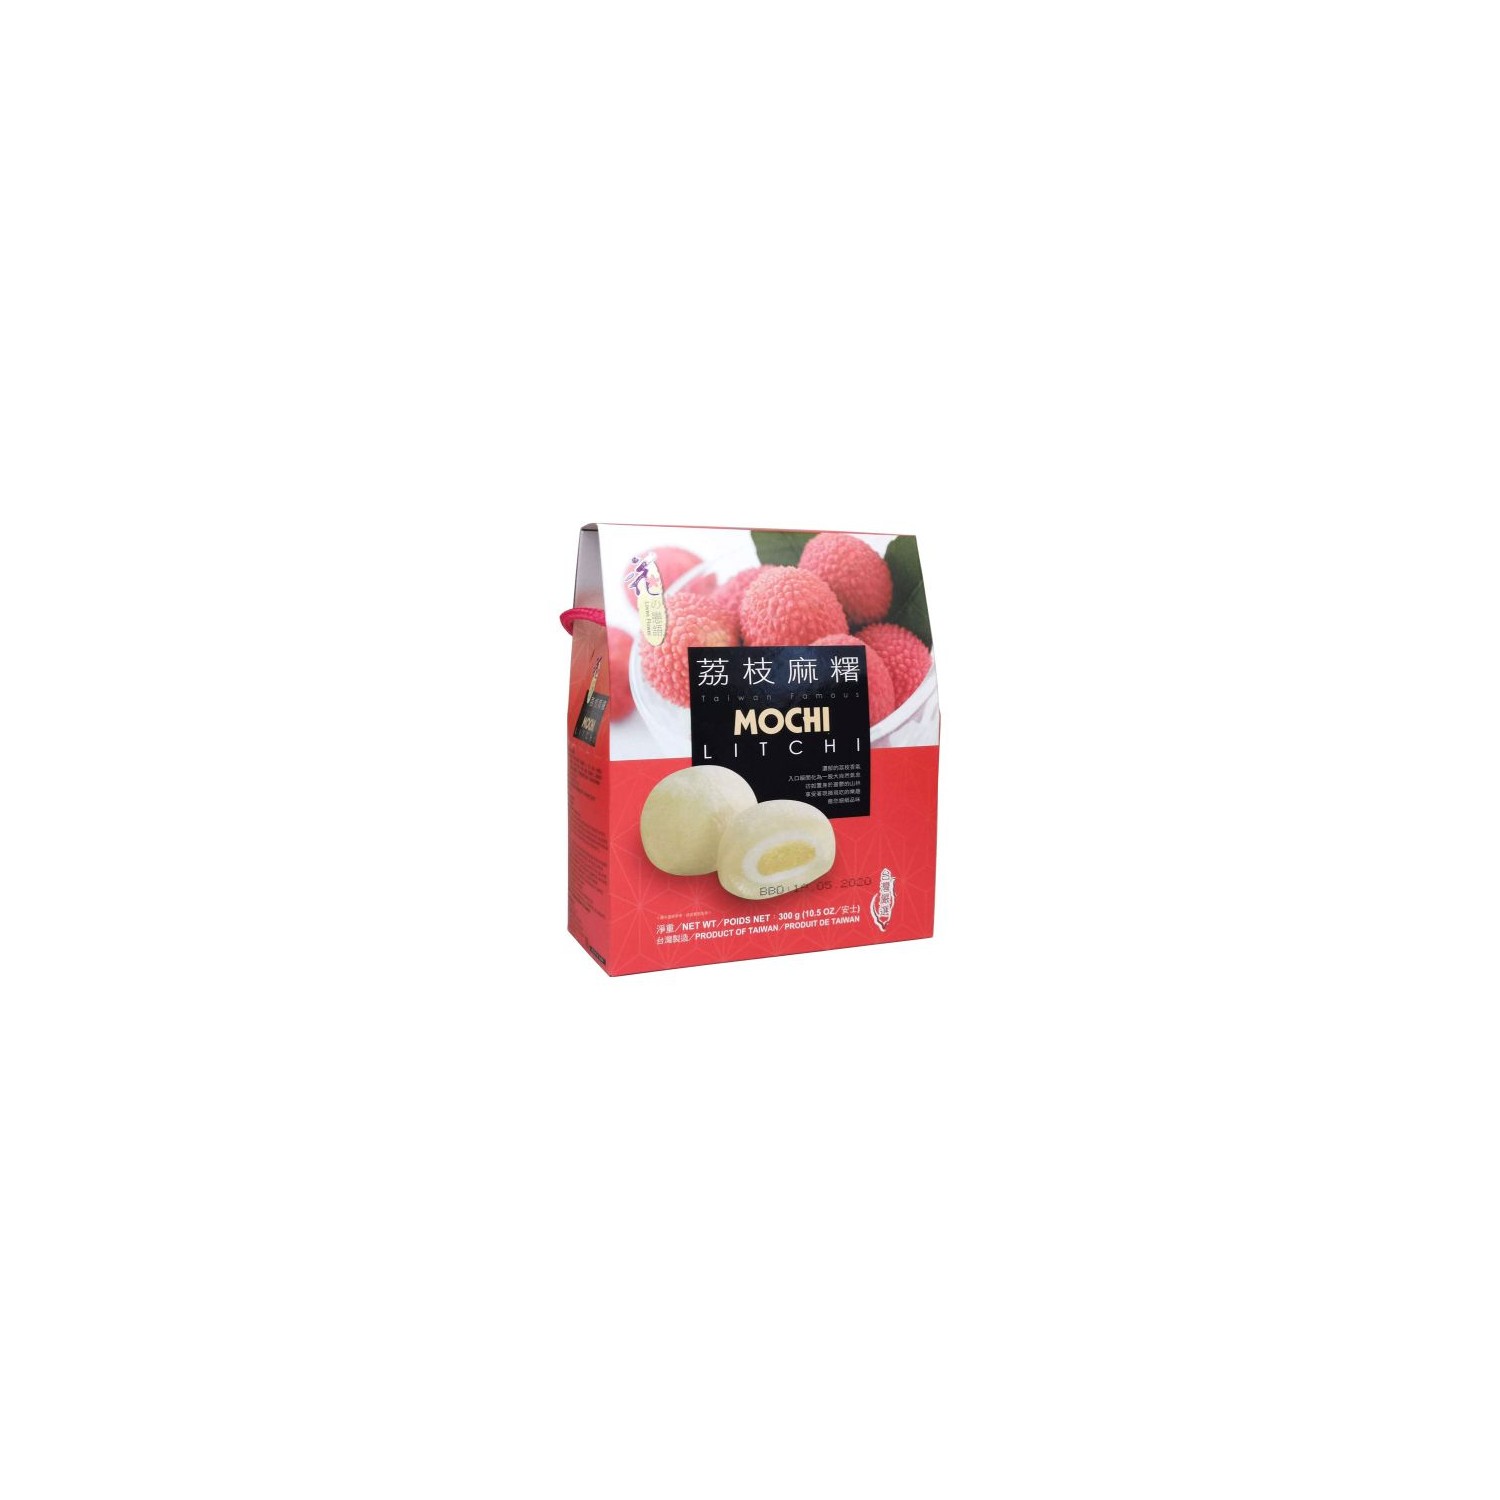 Love Flower Taiwanese Mochi Gift Pack 300g Mo Chi